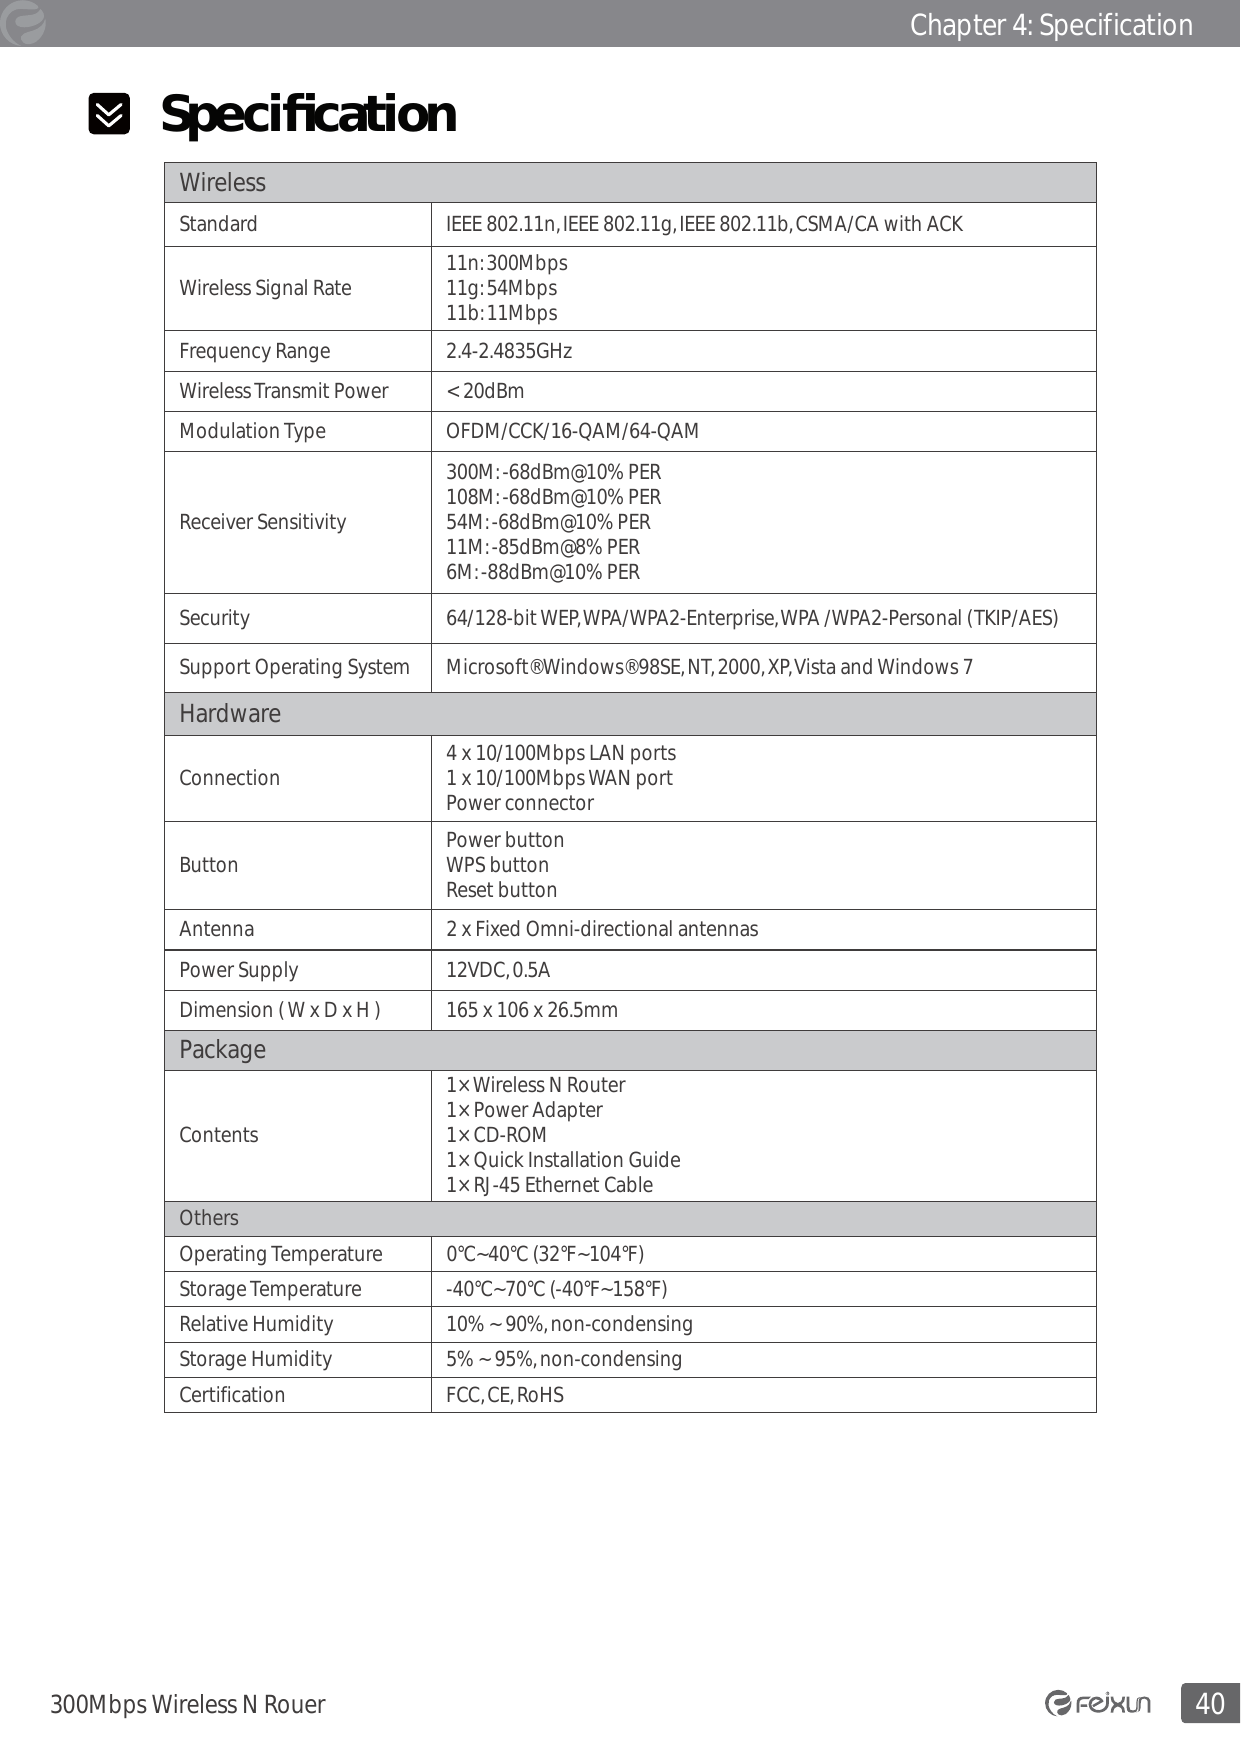 Chapter 4: Specification40300Mbps Wireless N Rouer  Speciﬁ cationWireless Standard IEEE 802.11n, IEEE 802.11g, IEEE 802.11b, CSMA/CA with ACKWireless Signal Rate 11n: 300Mbps11g: 54Mbps11b: 11MbpsFrequency Range  2.4-2.4835GHz Wireless Transmit Power &lt; 20dBmModulation Type  OFDM/CCK/16-QAM/64-QAMReceiver Sensitivity 300M: -68dBm@10% PER108M: -68dBm@10% PER54M: -68dBm@10% PER11M: -85dBm@8% PER6M: -88dBm@10% PERSecurity 64/128-bit WEP, WPA/WPA2-Enterprise, WPA /WPA2-Personal (TKIP/AES)Support Operating System Microsoft® Windows® 98SE, NT, 2000, XP, Vista and Windows 7Hardware Connection 4 x 10/100Mbps LAN ports1 x 10/100Mbps WAN portPower connectorButton Power buttonWPS buttonReset buttonAntenna 2 x Fixed Omni-directional antennasPower Supply 12VDC, 0.5ADimension ( W x D x H ) 165 x 106 x 26.5mmPackage Contents1× Wireless N Router1× Power Adapter1× CD-ROM1× Quick Installation Guide1× RJ-45 Ethernet CableOthersOperating Temperature 0°C~40°C (32°F~104°F)Storage Temperature -40°C~70°C (-40°F~158°F)Relative Humidity 10% ~ 90%, non-condensingStorage Humidity 5% ~ 95%, non-condensingCertification FCC, CE, RoHS